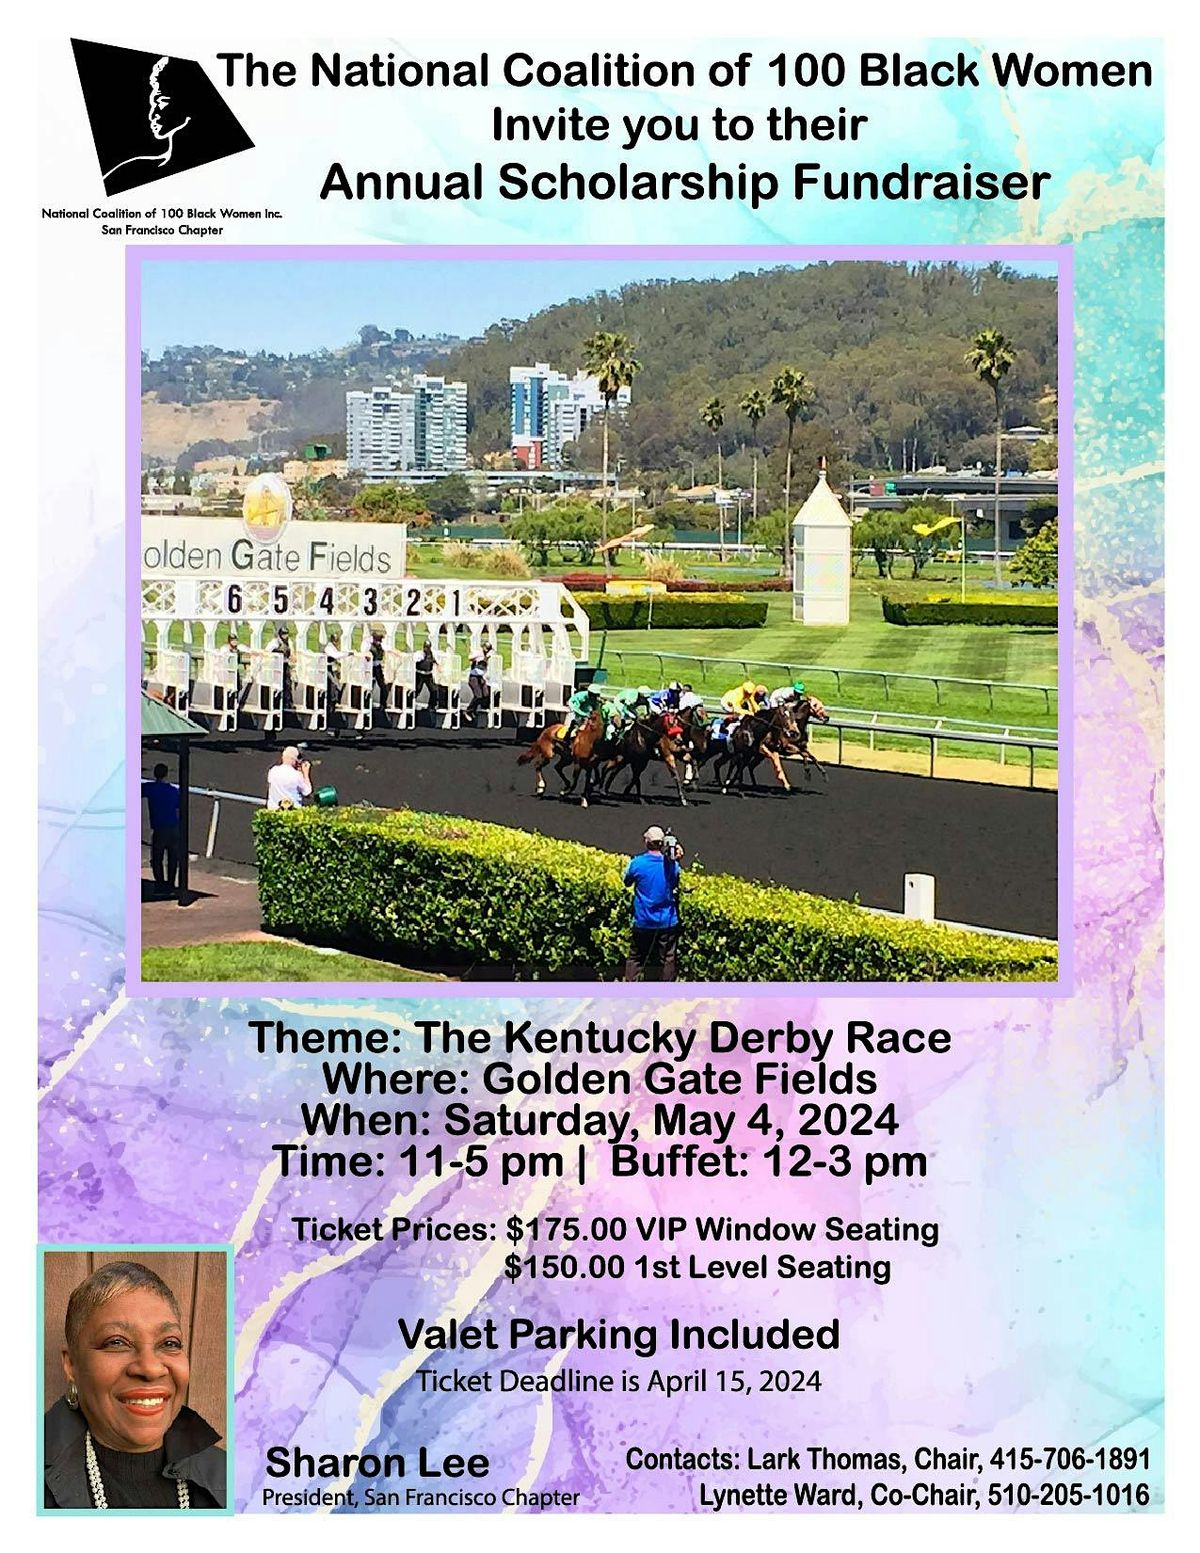 The National Coalition of 100 Black Women, SF Annual Scholarship Fundraiser